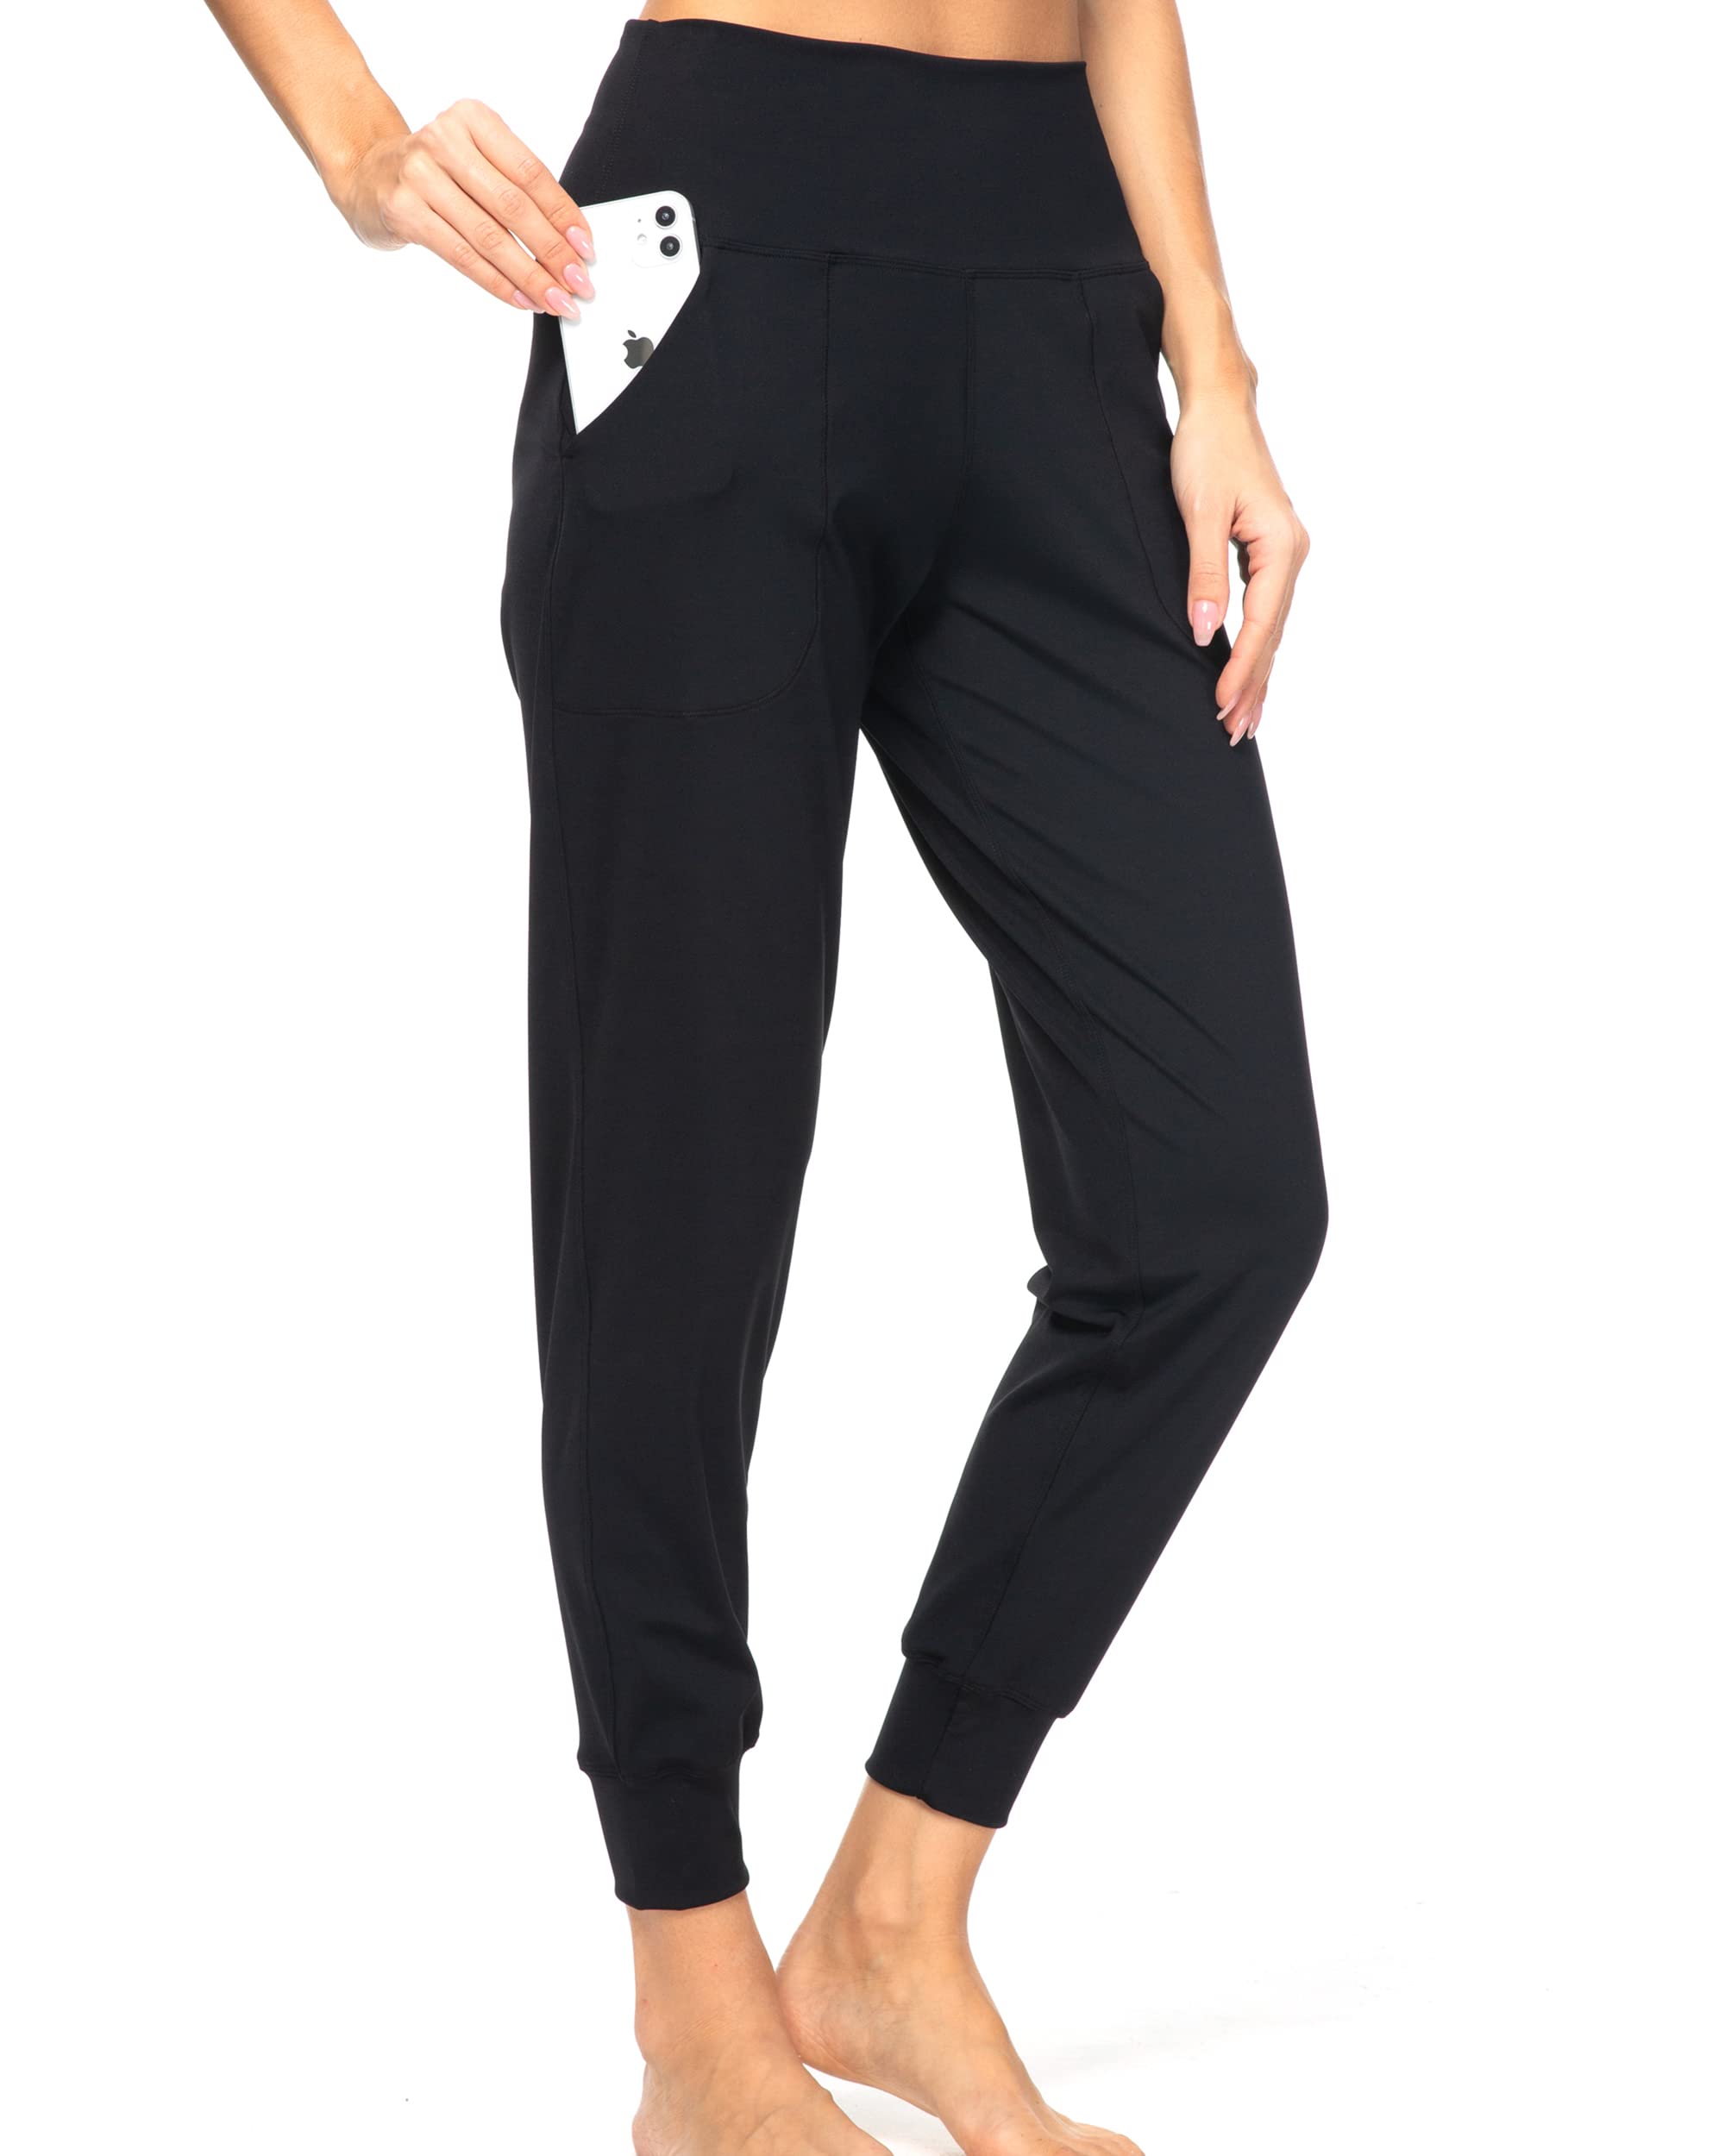 Kcutteyg Women's Joggers with Pockets High Waisted, Workout Athletic Sports Soft  Lounge Pants for Running Medium Black